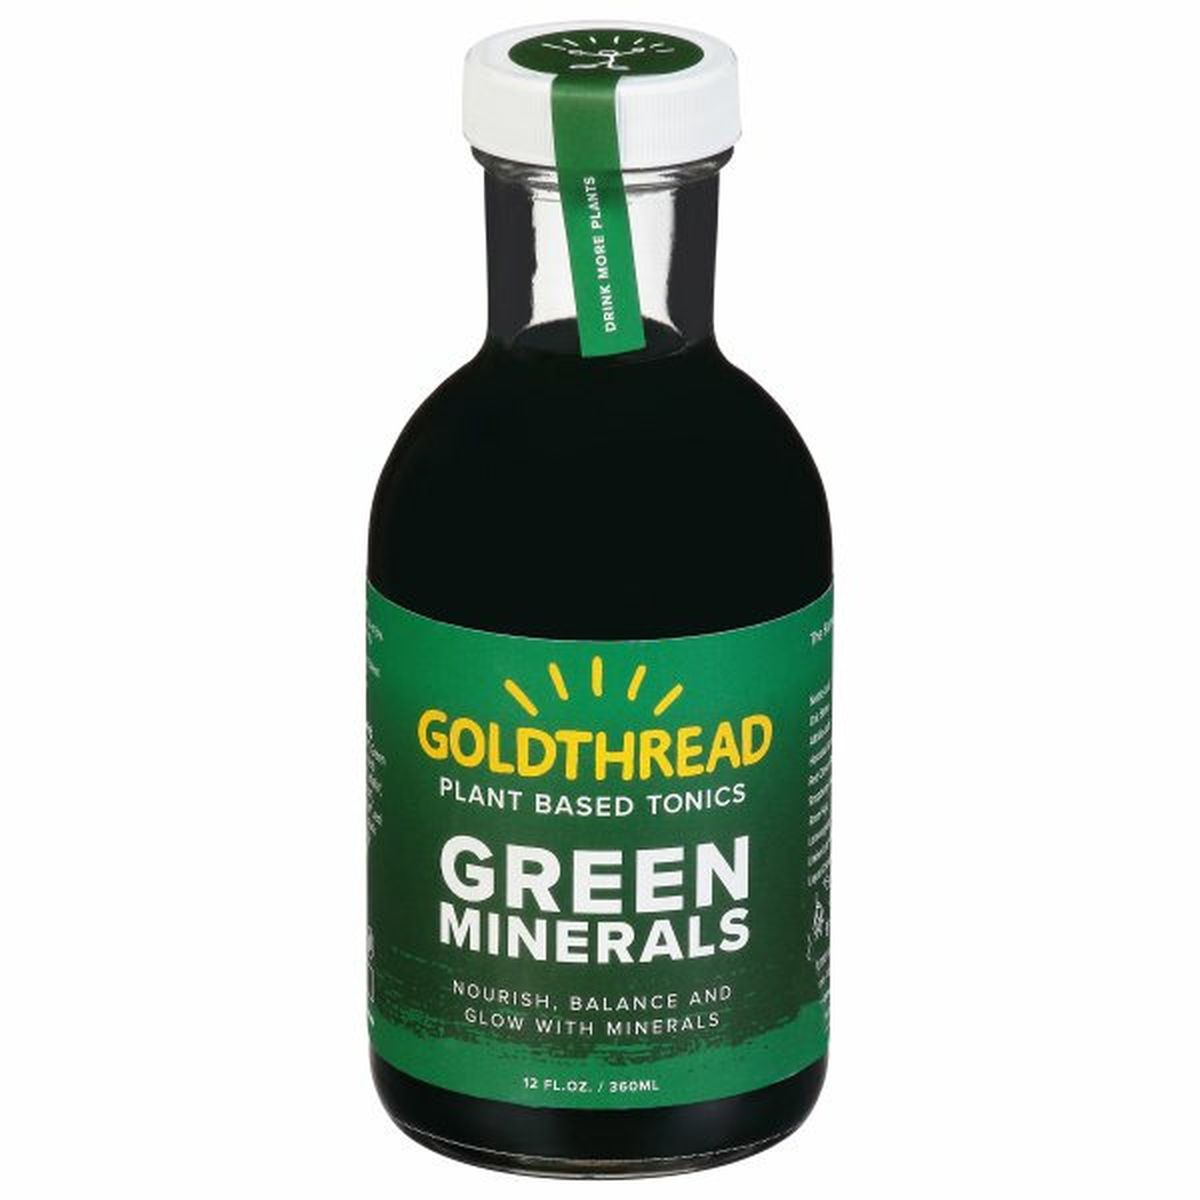 Calories in Goldthread Tonics, Plant Based, Green Minerals